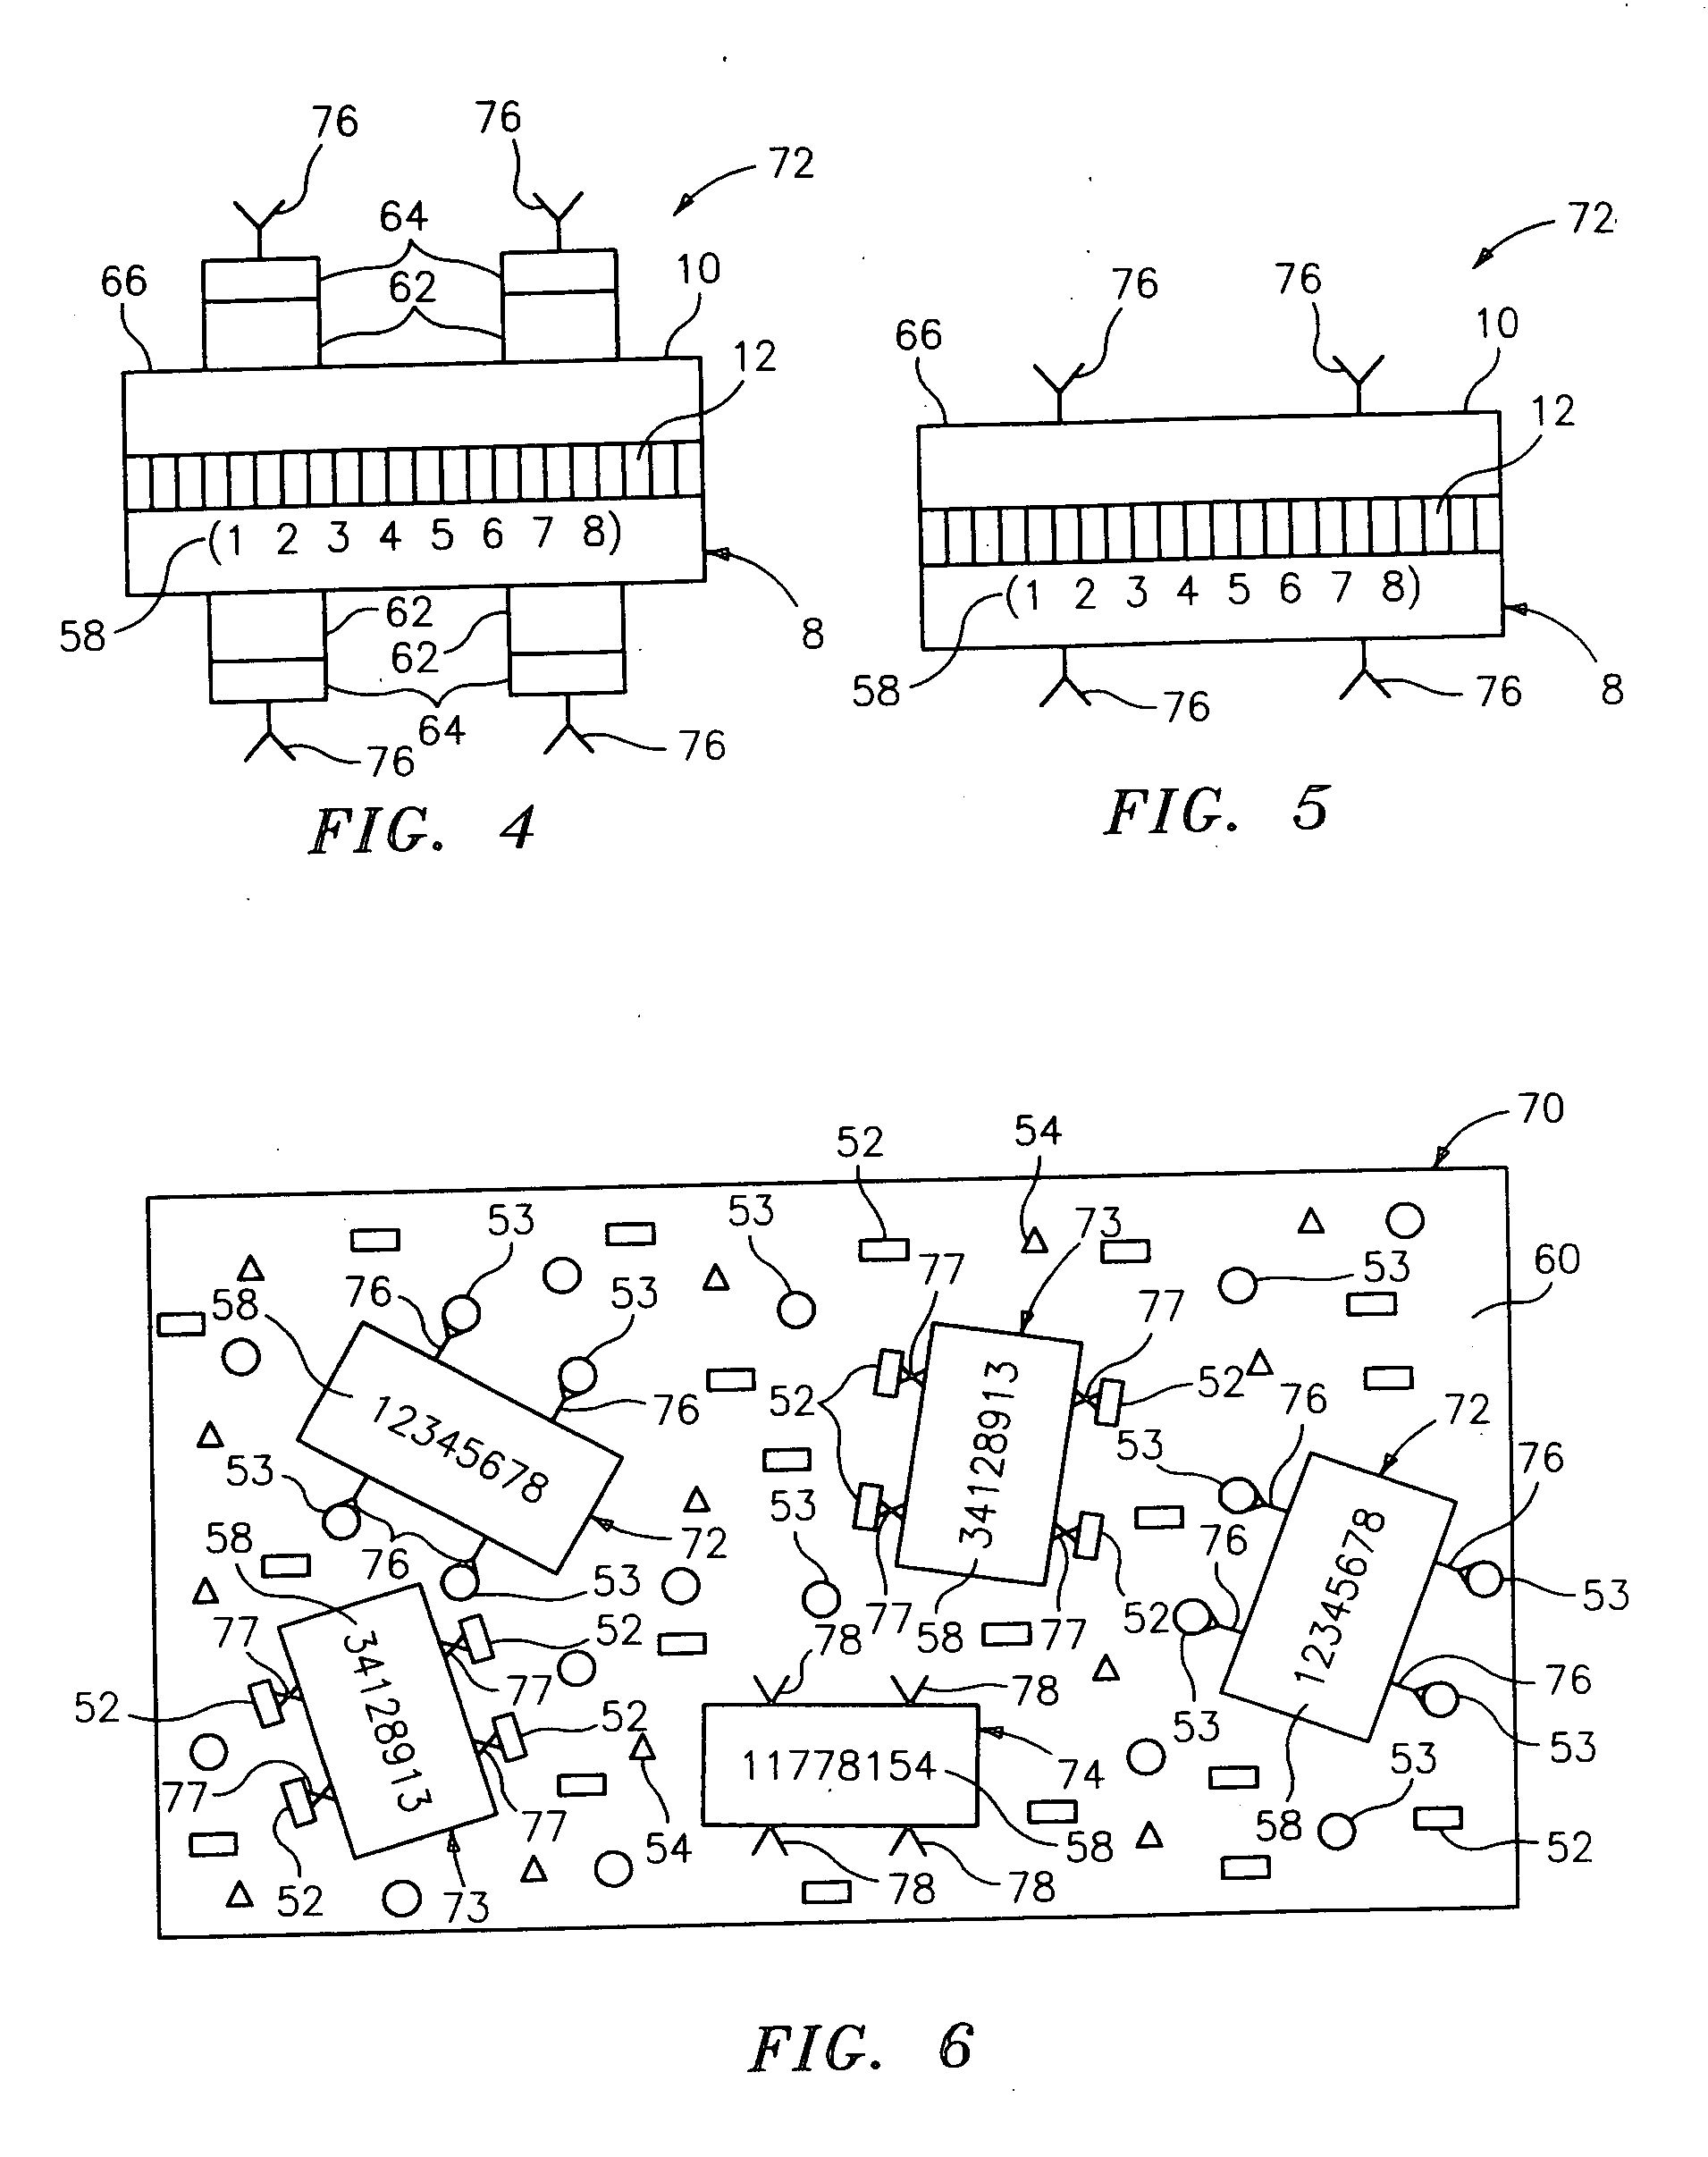 Diffraction grating-based encoded element having a substance disposed thereon